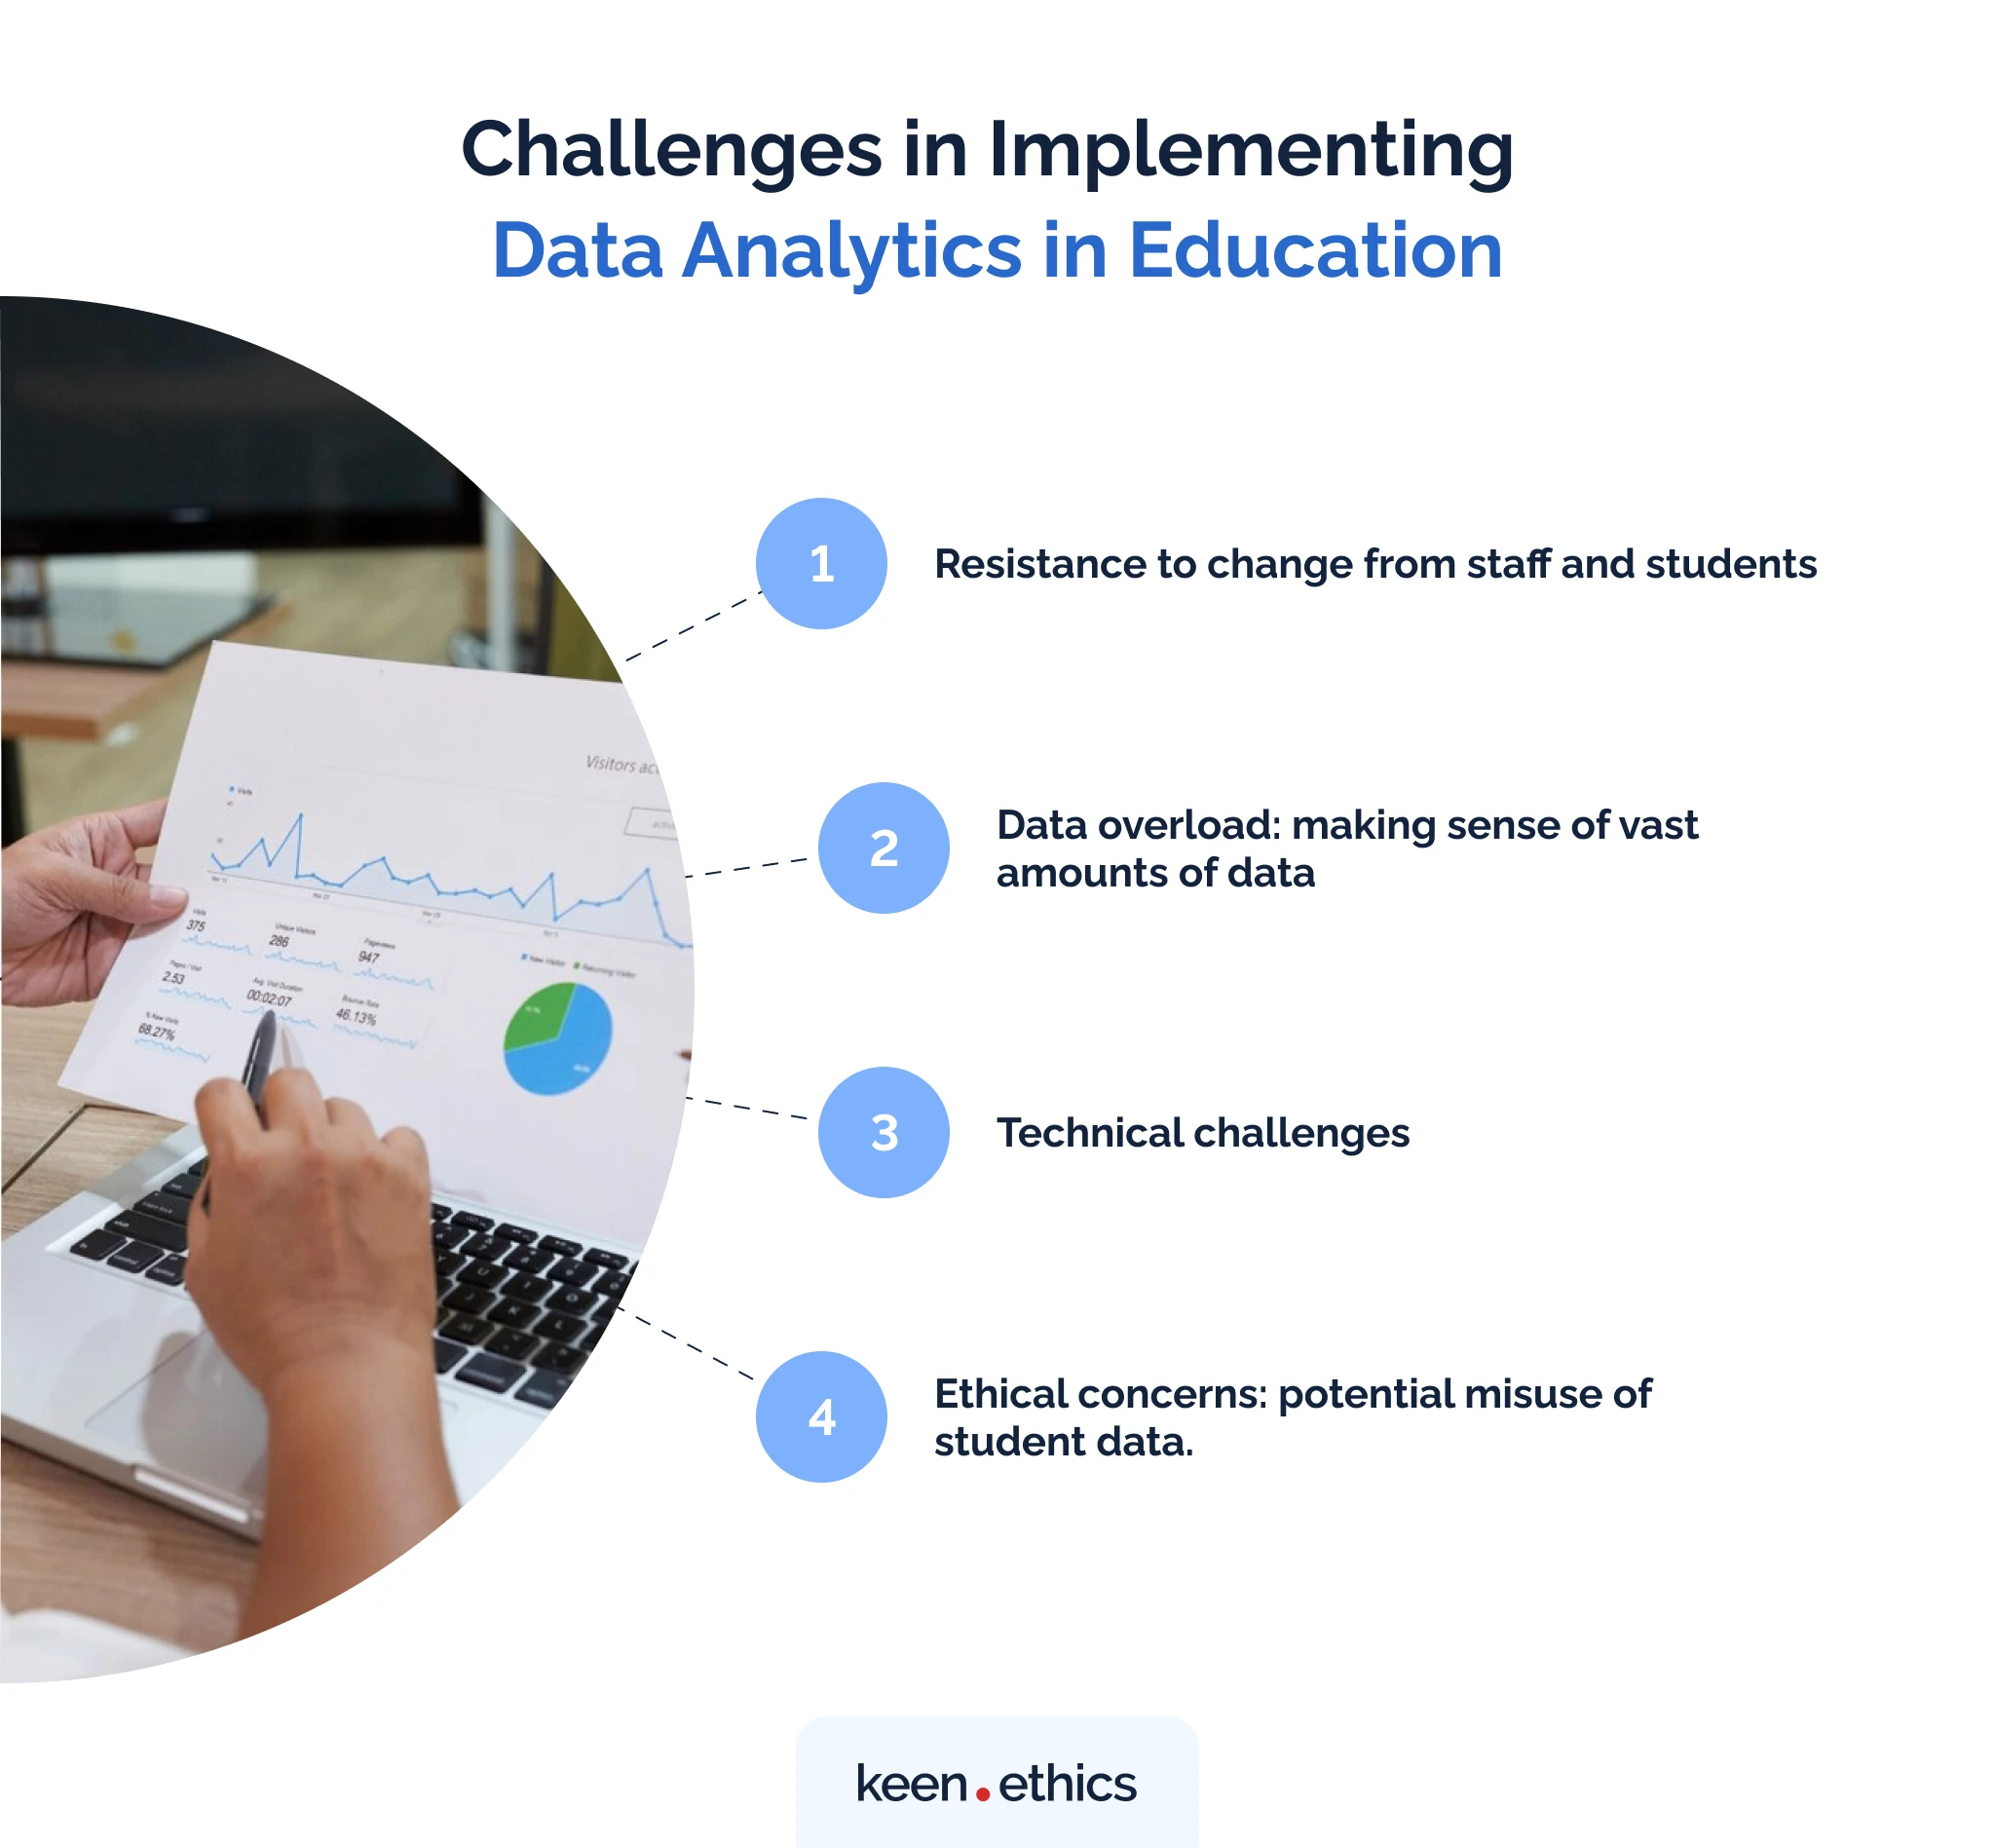 Challenges in implementing data analytics in education